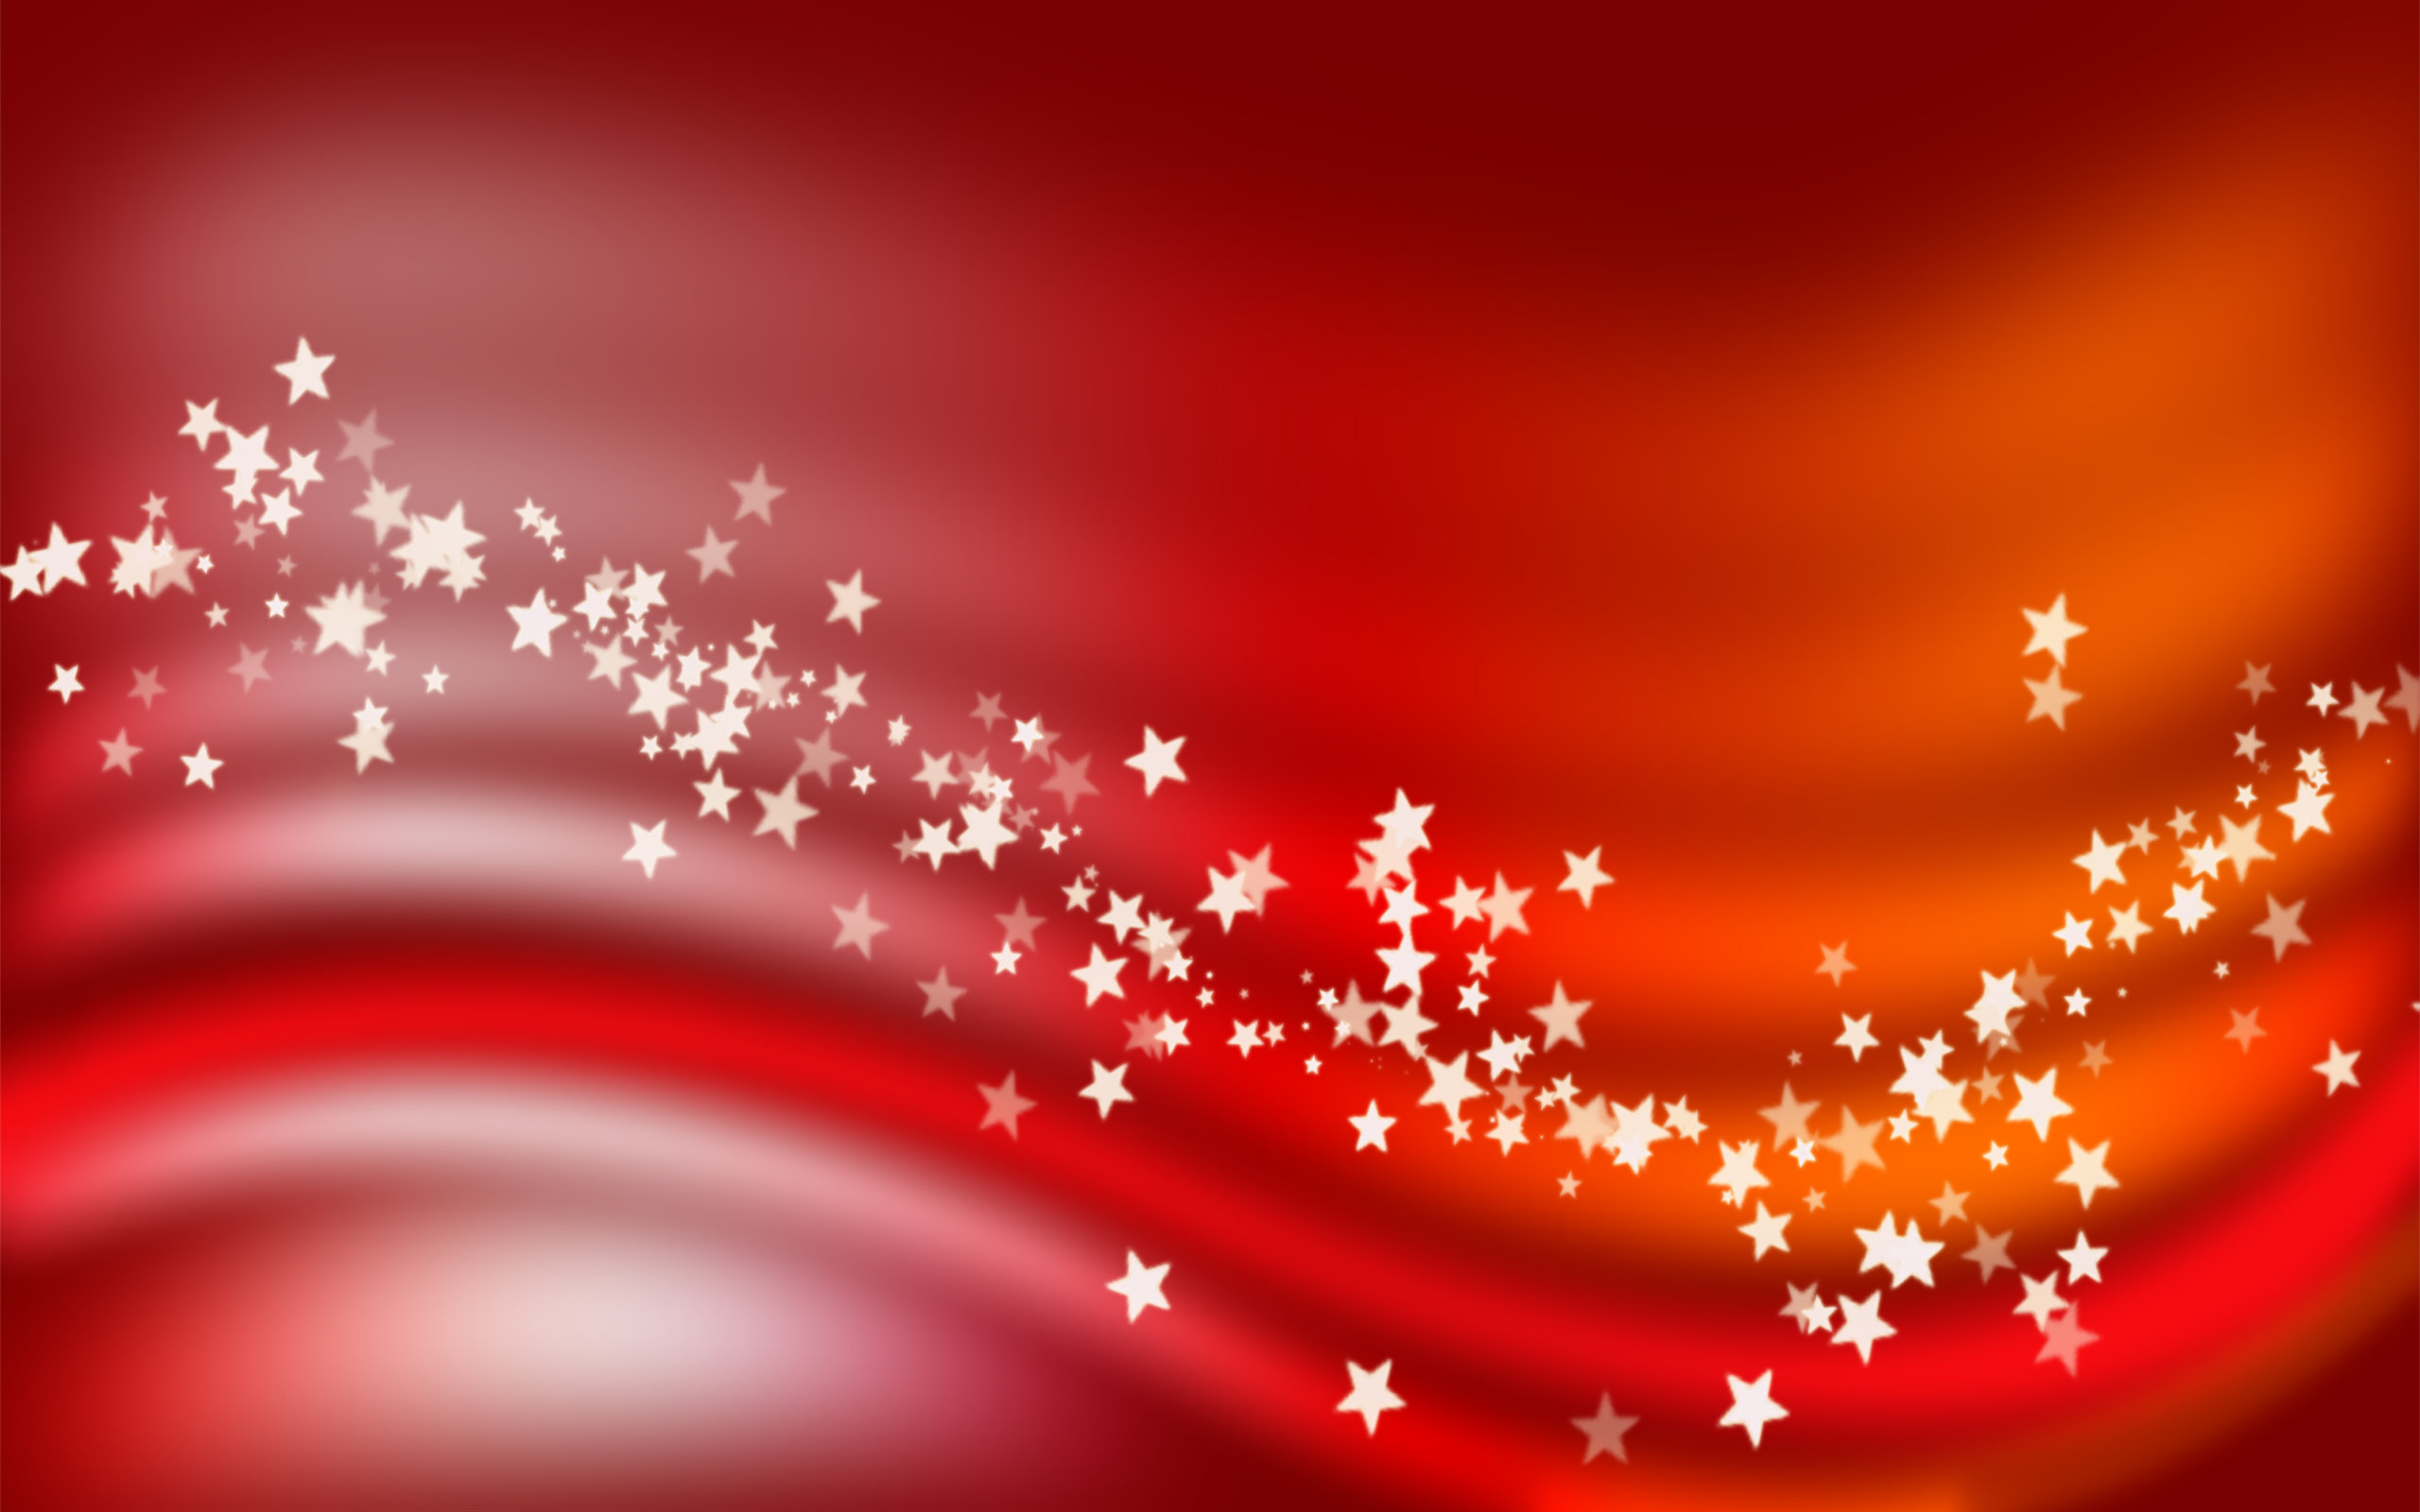 Stars - Christmas Background Hd Red - HD Wallpaper 